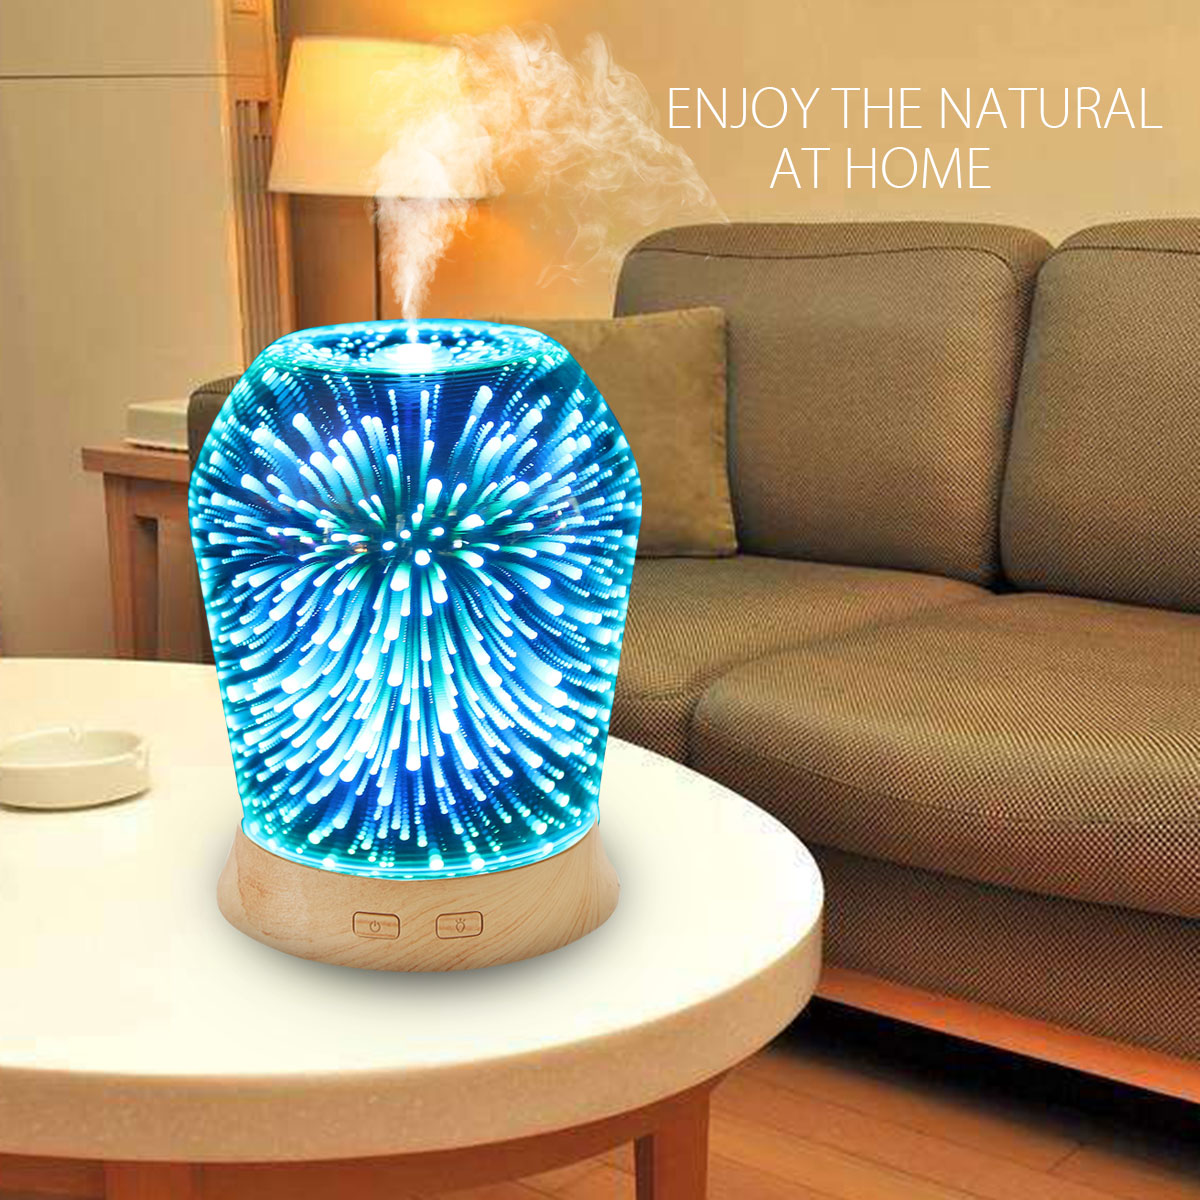 3D-LED-Ultrasonic-Diffuser-Humidifier-Aromatherapy-Essential-Oil-Diffuser-Mist-Humidifier-1421490-4